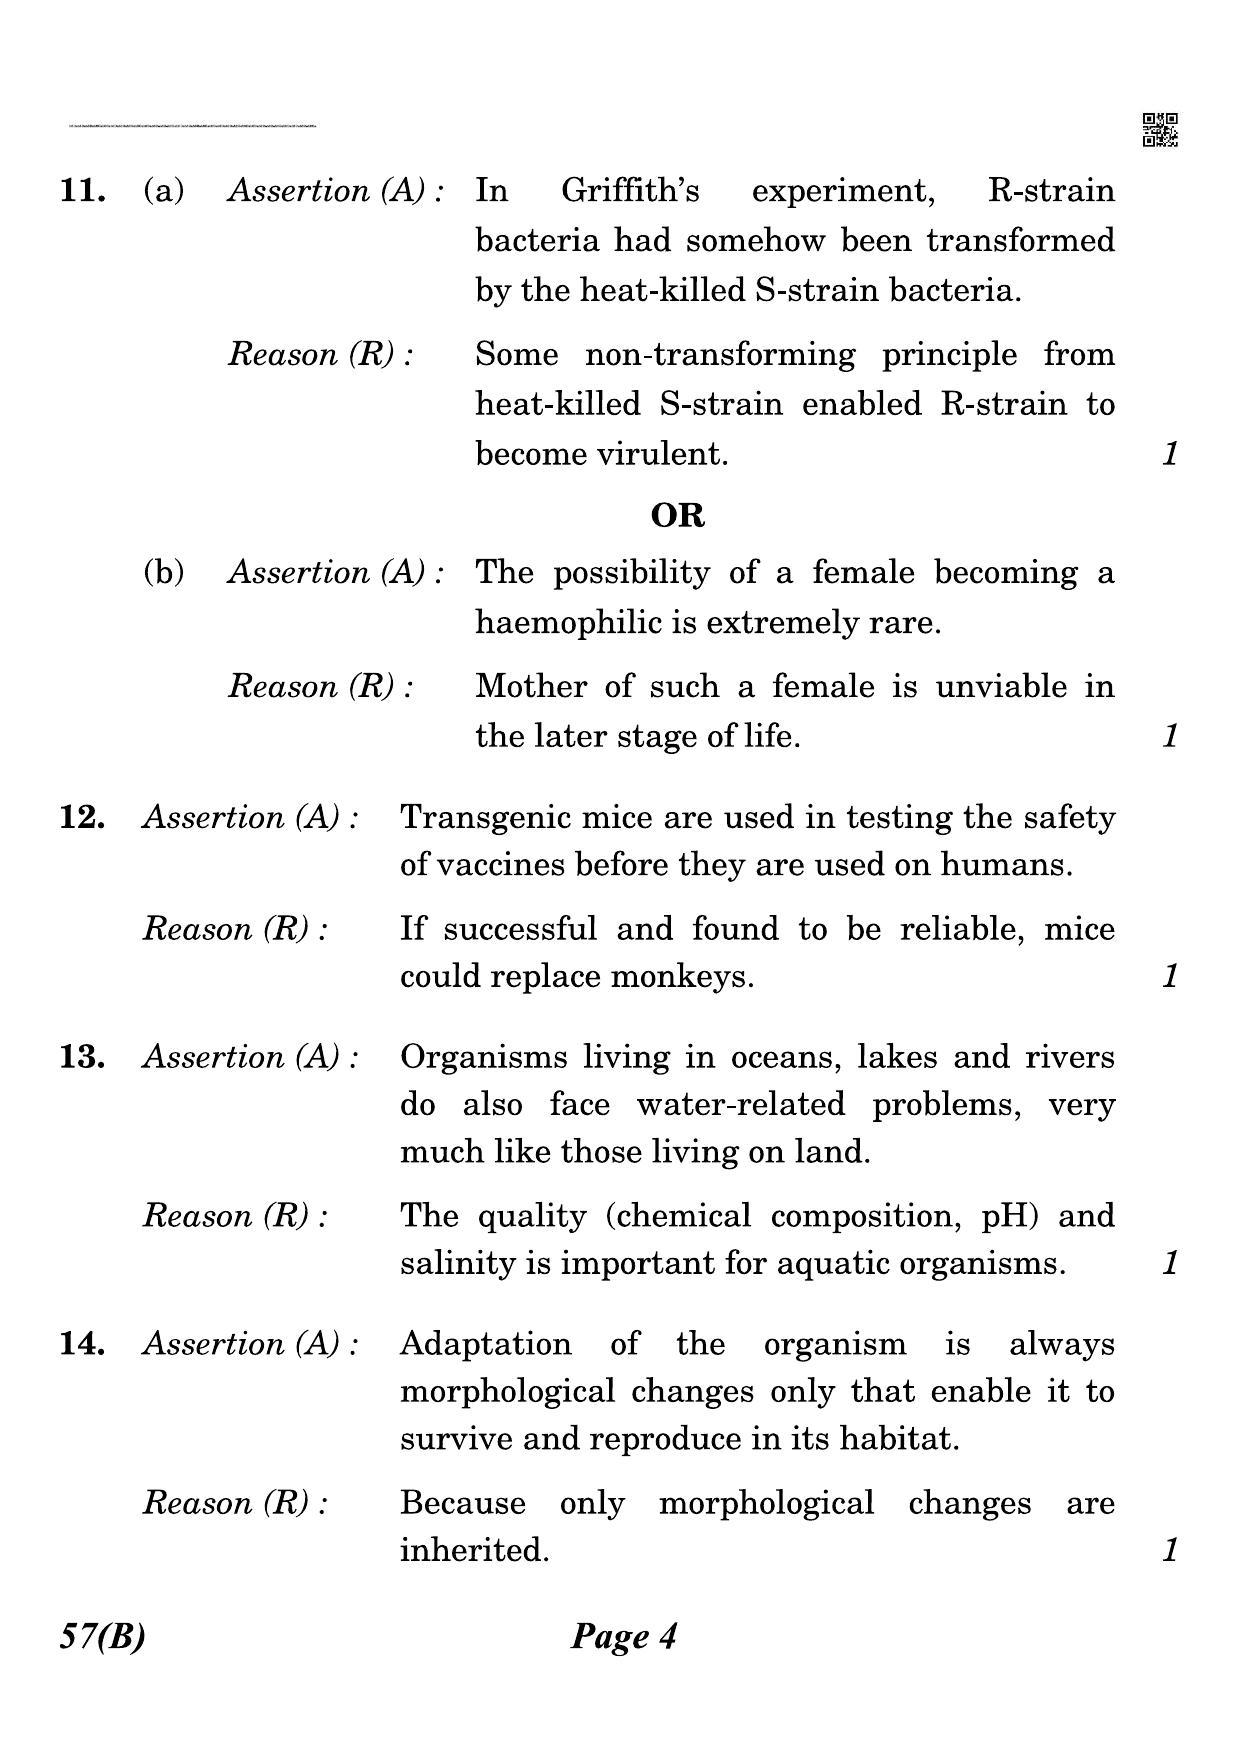 CBSE Class 12 QP_044_biology_for_visually_impared_candidates 2021 Compartment Question Paper - Page 4